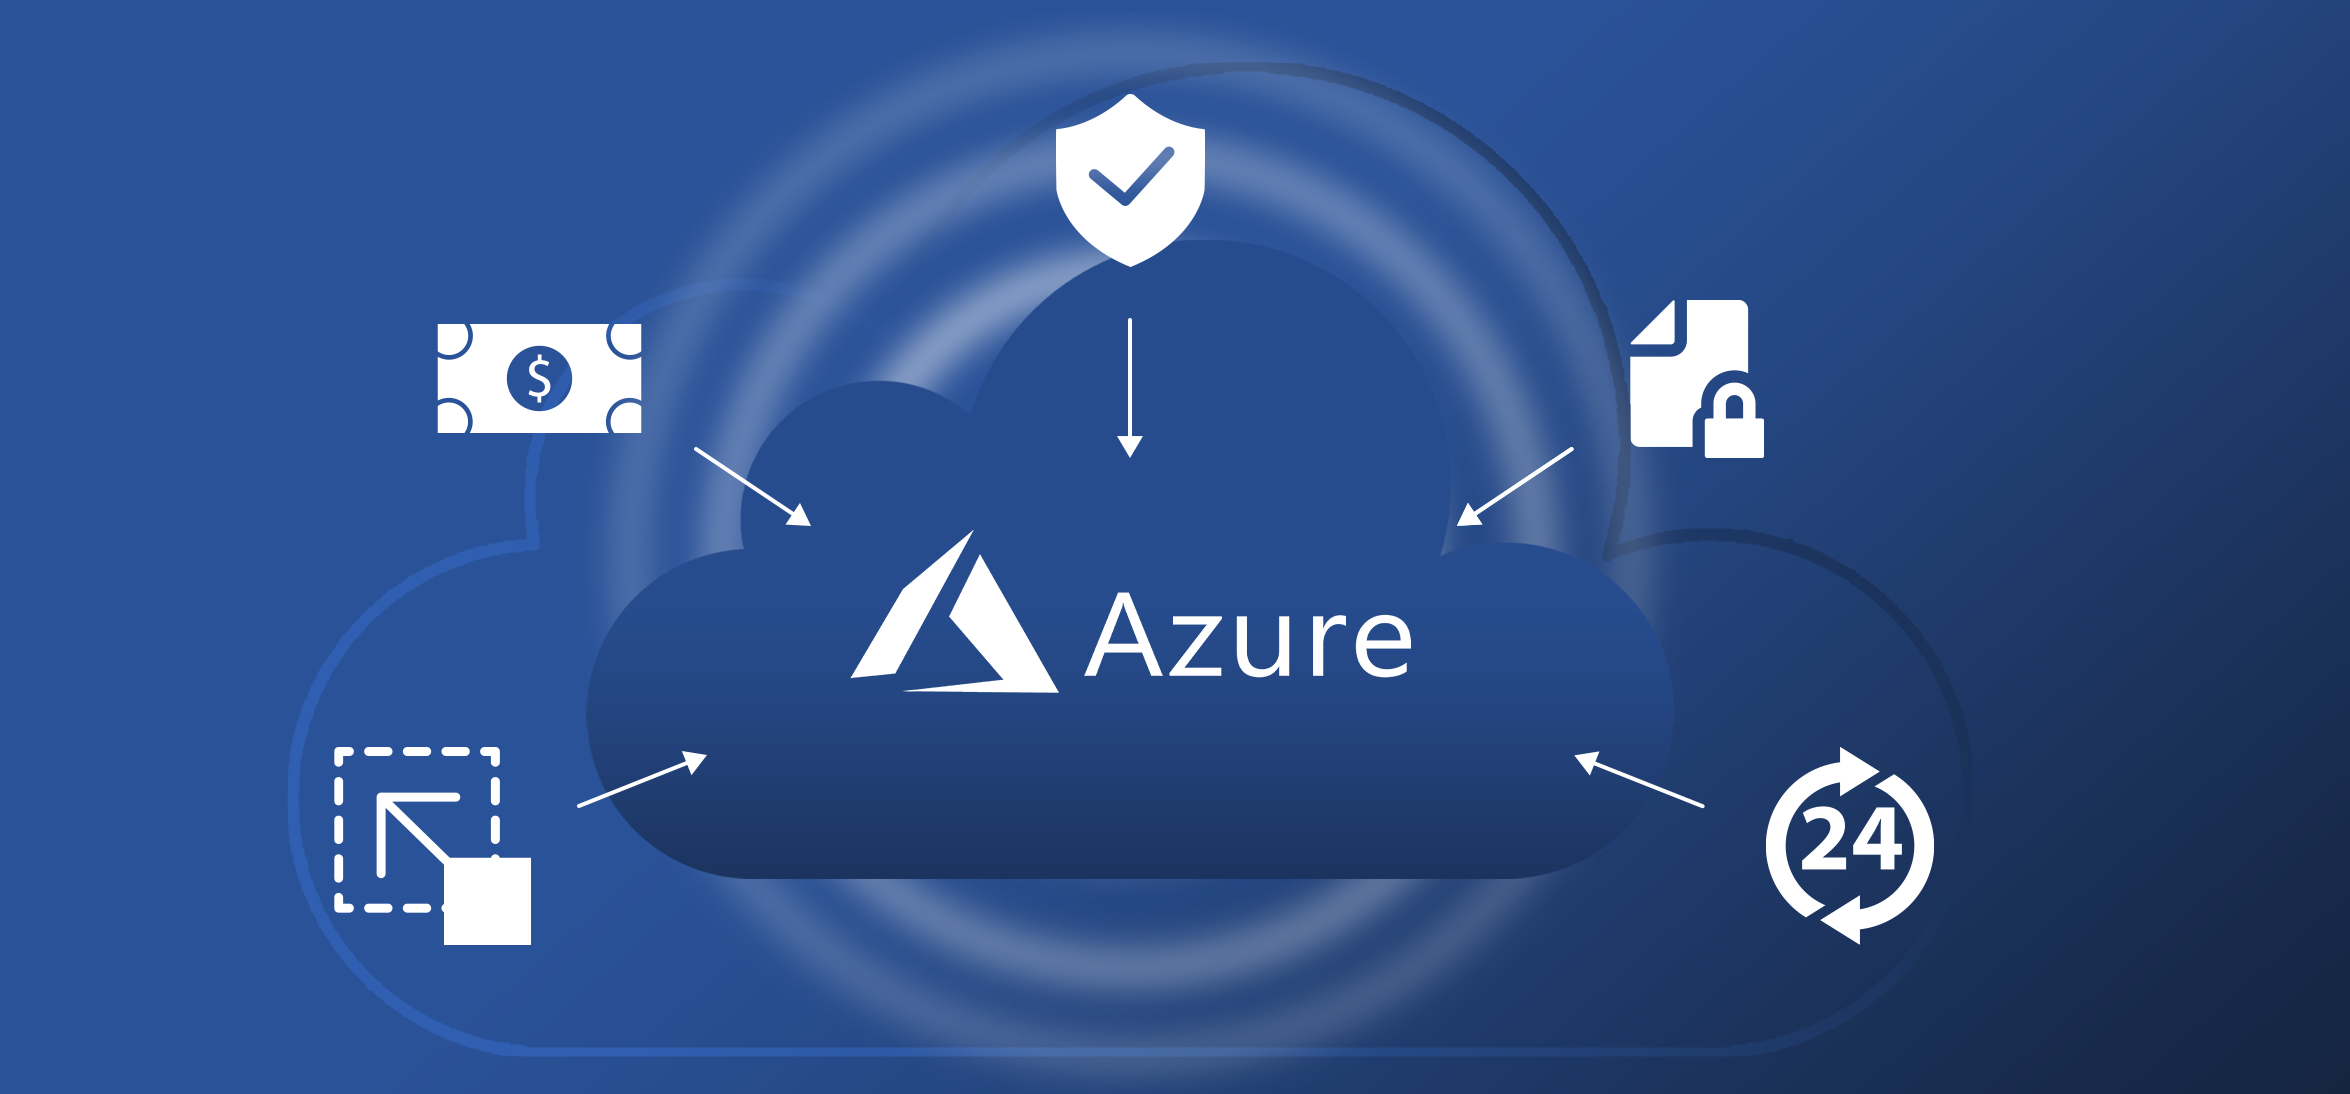 Microsoft Azure Administration and Consulting Services in Encinitas CA, 92024